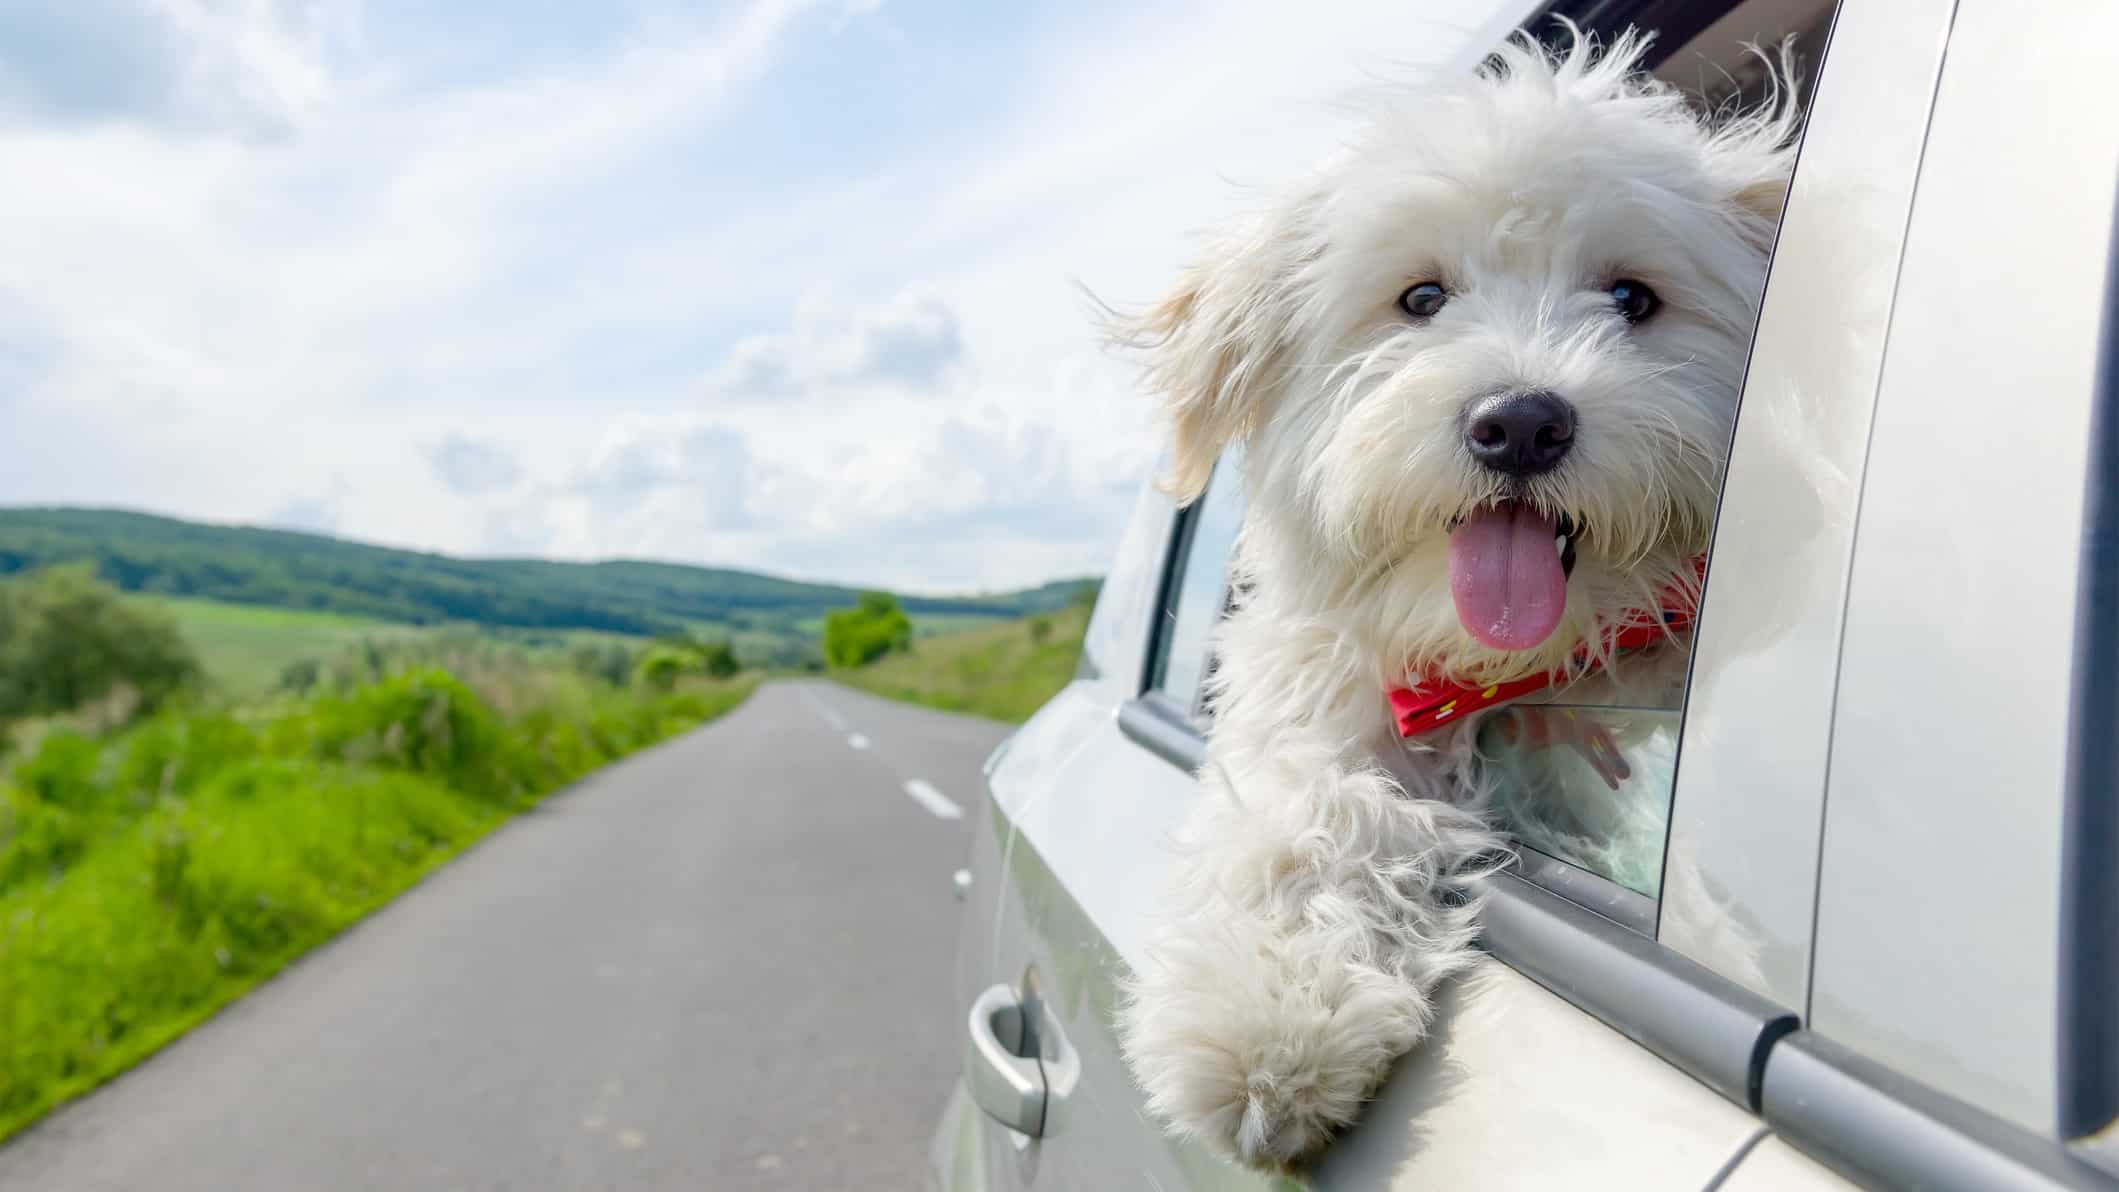 a happy dog puts its head out of a car window with a road in the background, indicating a positive share price for ASX automotive shares